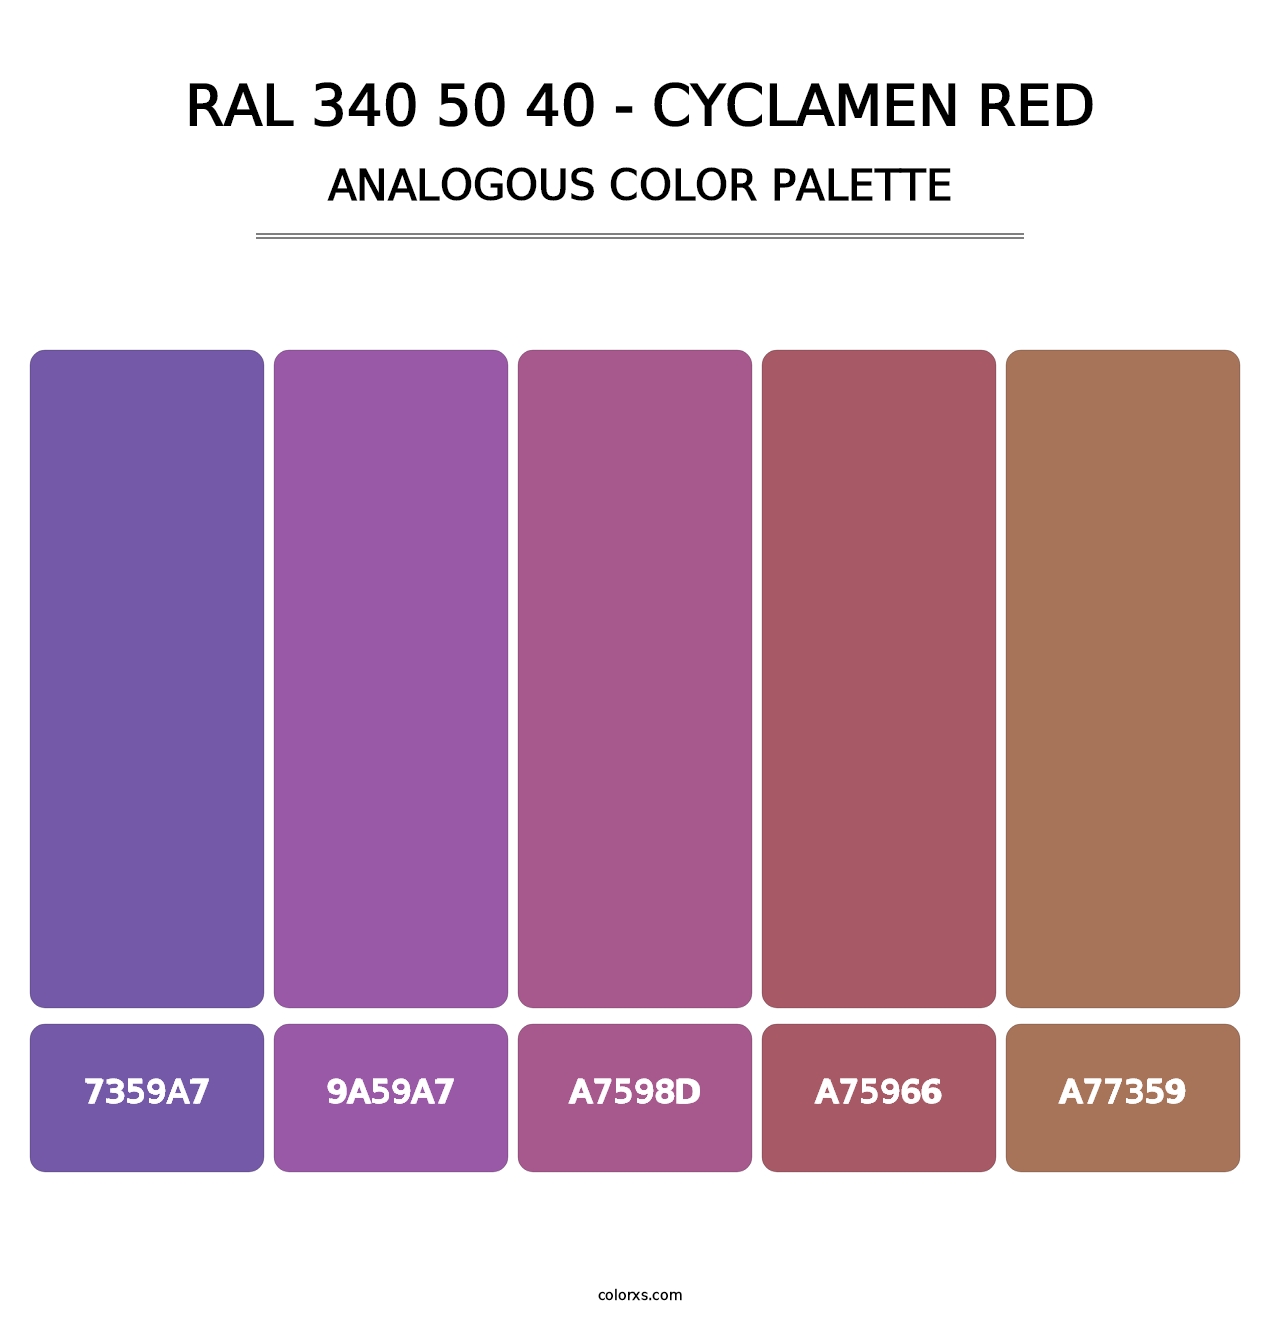 RAL 340 50 40 - Cyclamen Red - Analogous Color Palette